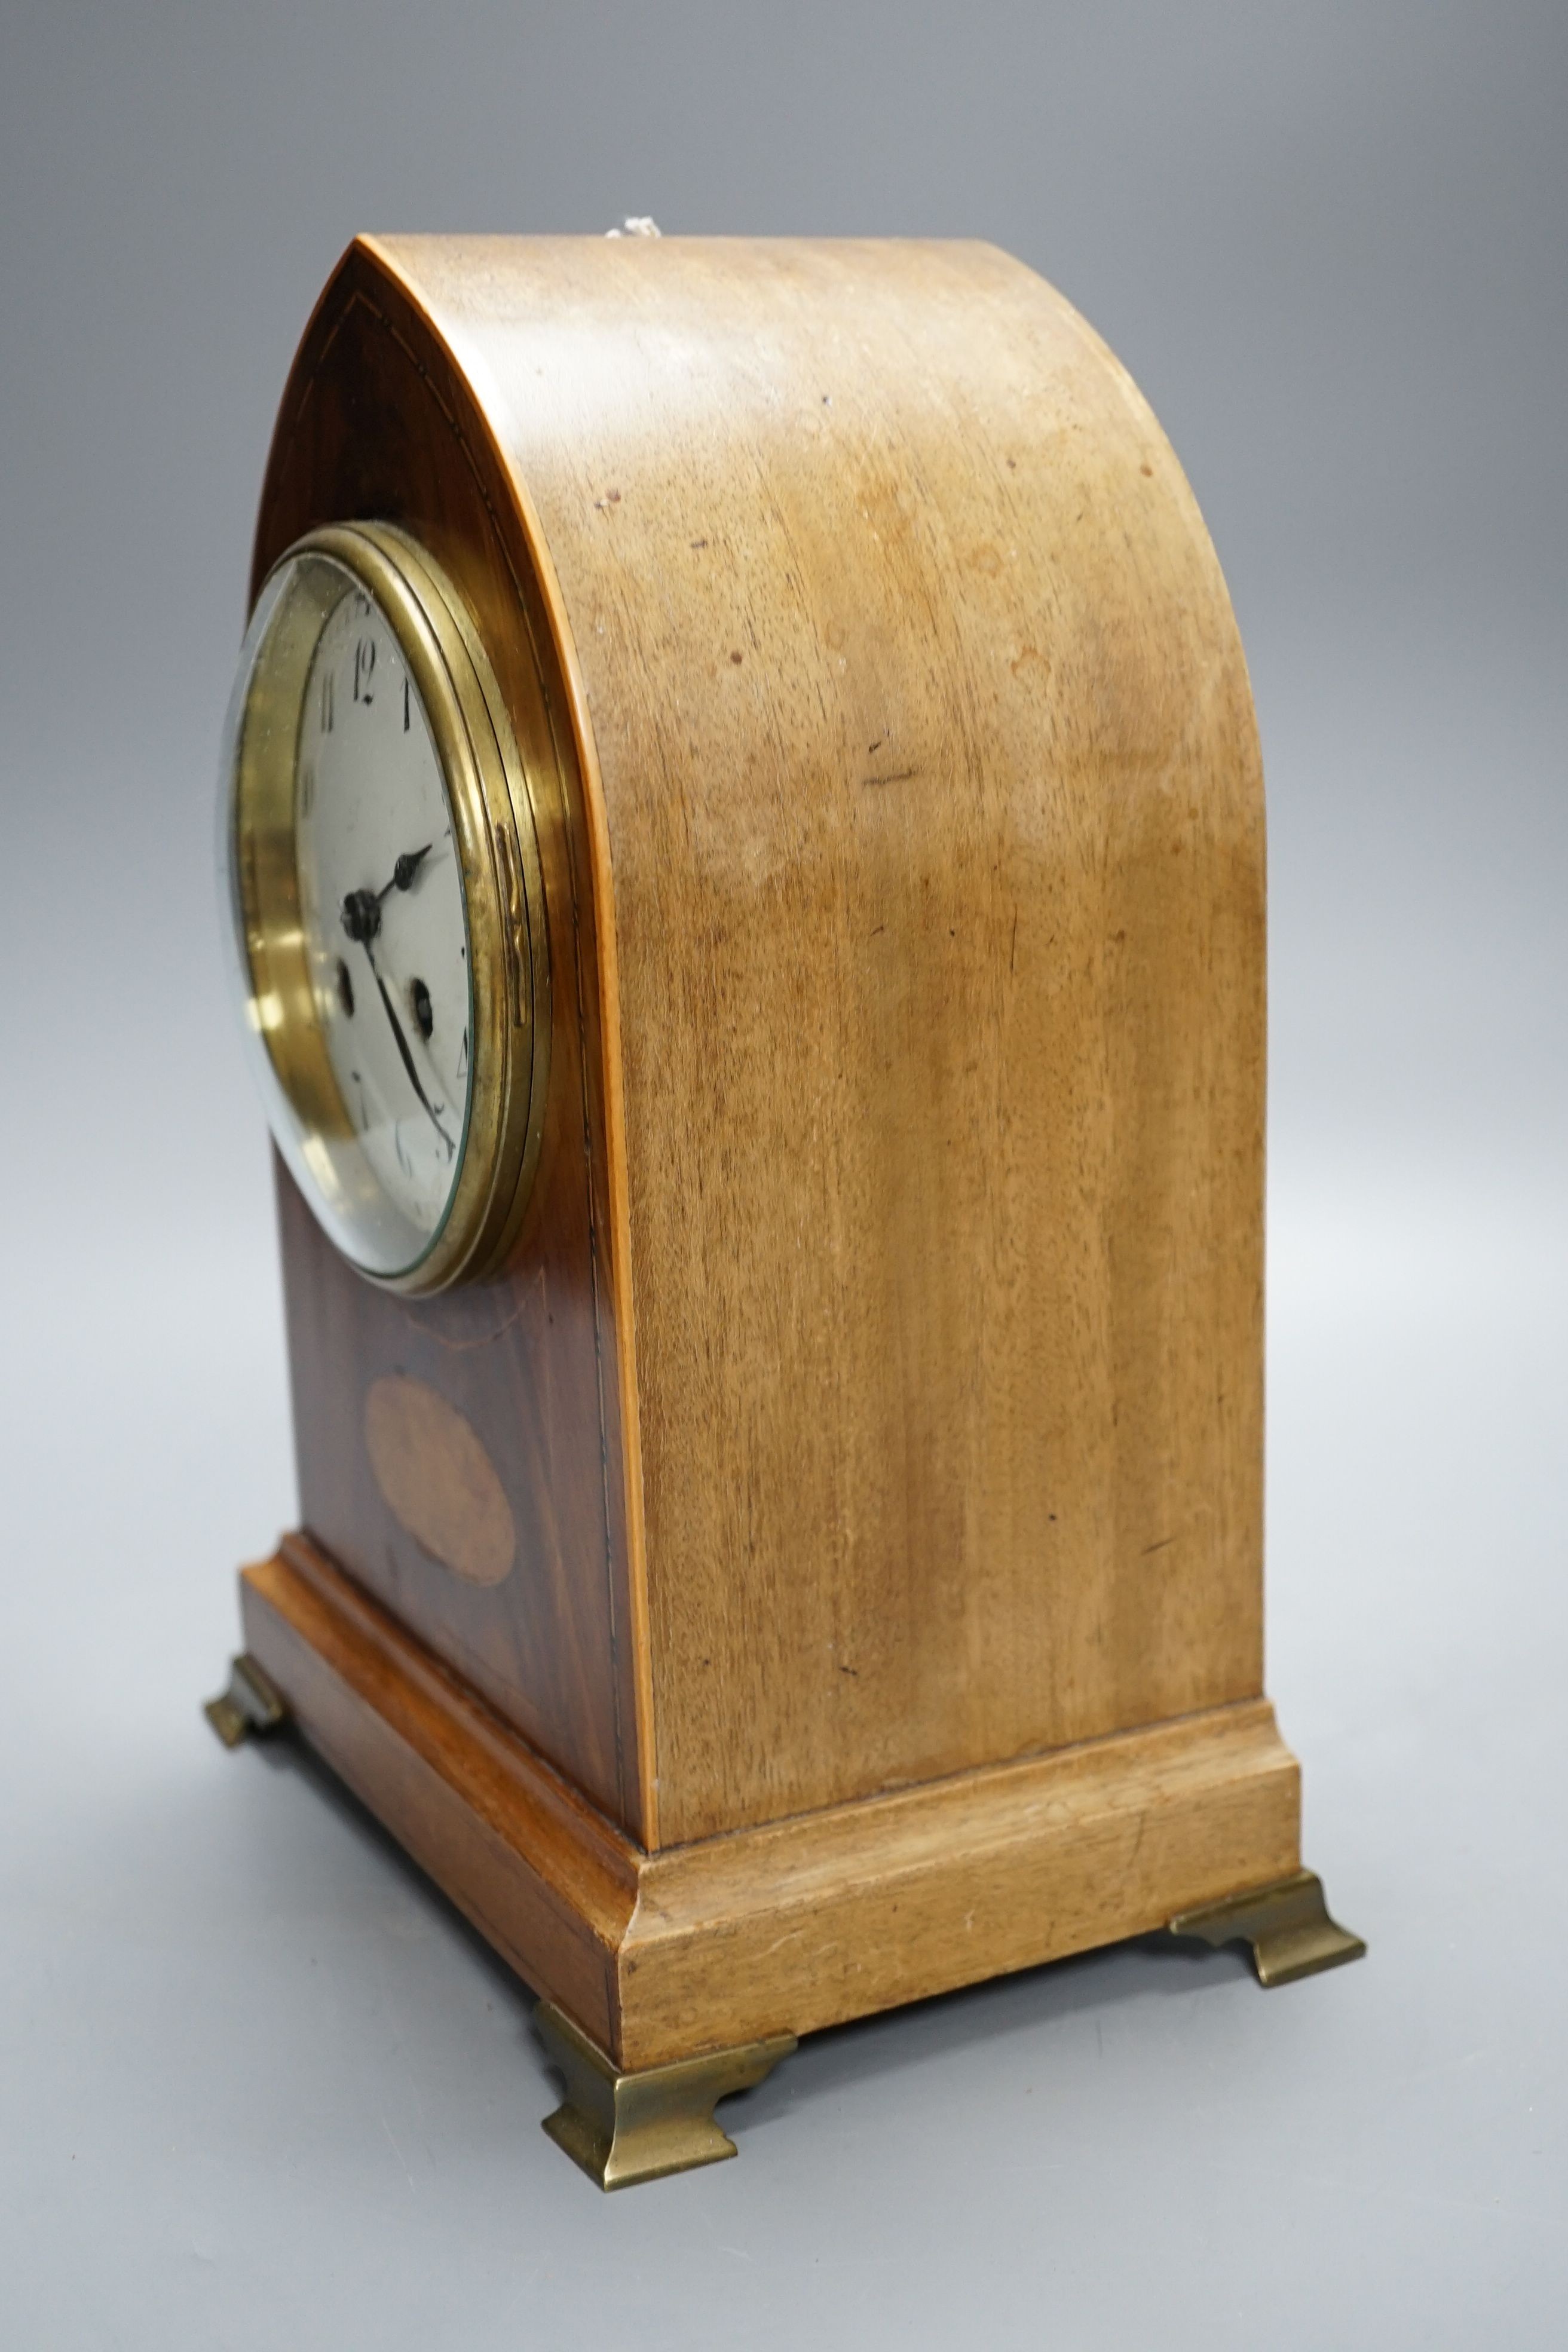 An Edwardian mahogany mantel clock, lancet top case, with white enamelled dial. Key and pendulum. 29cm